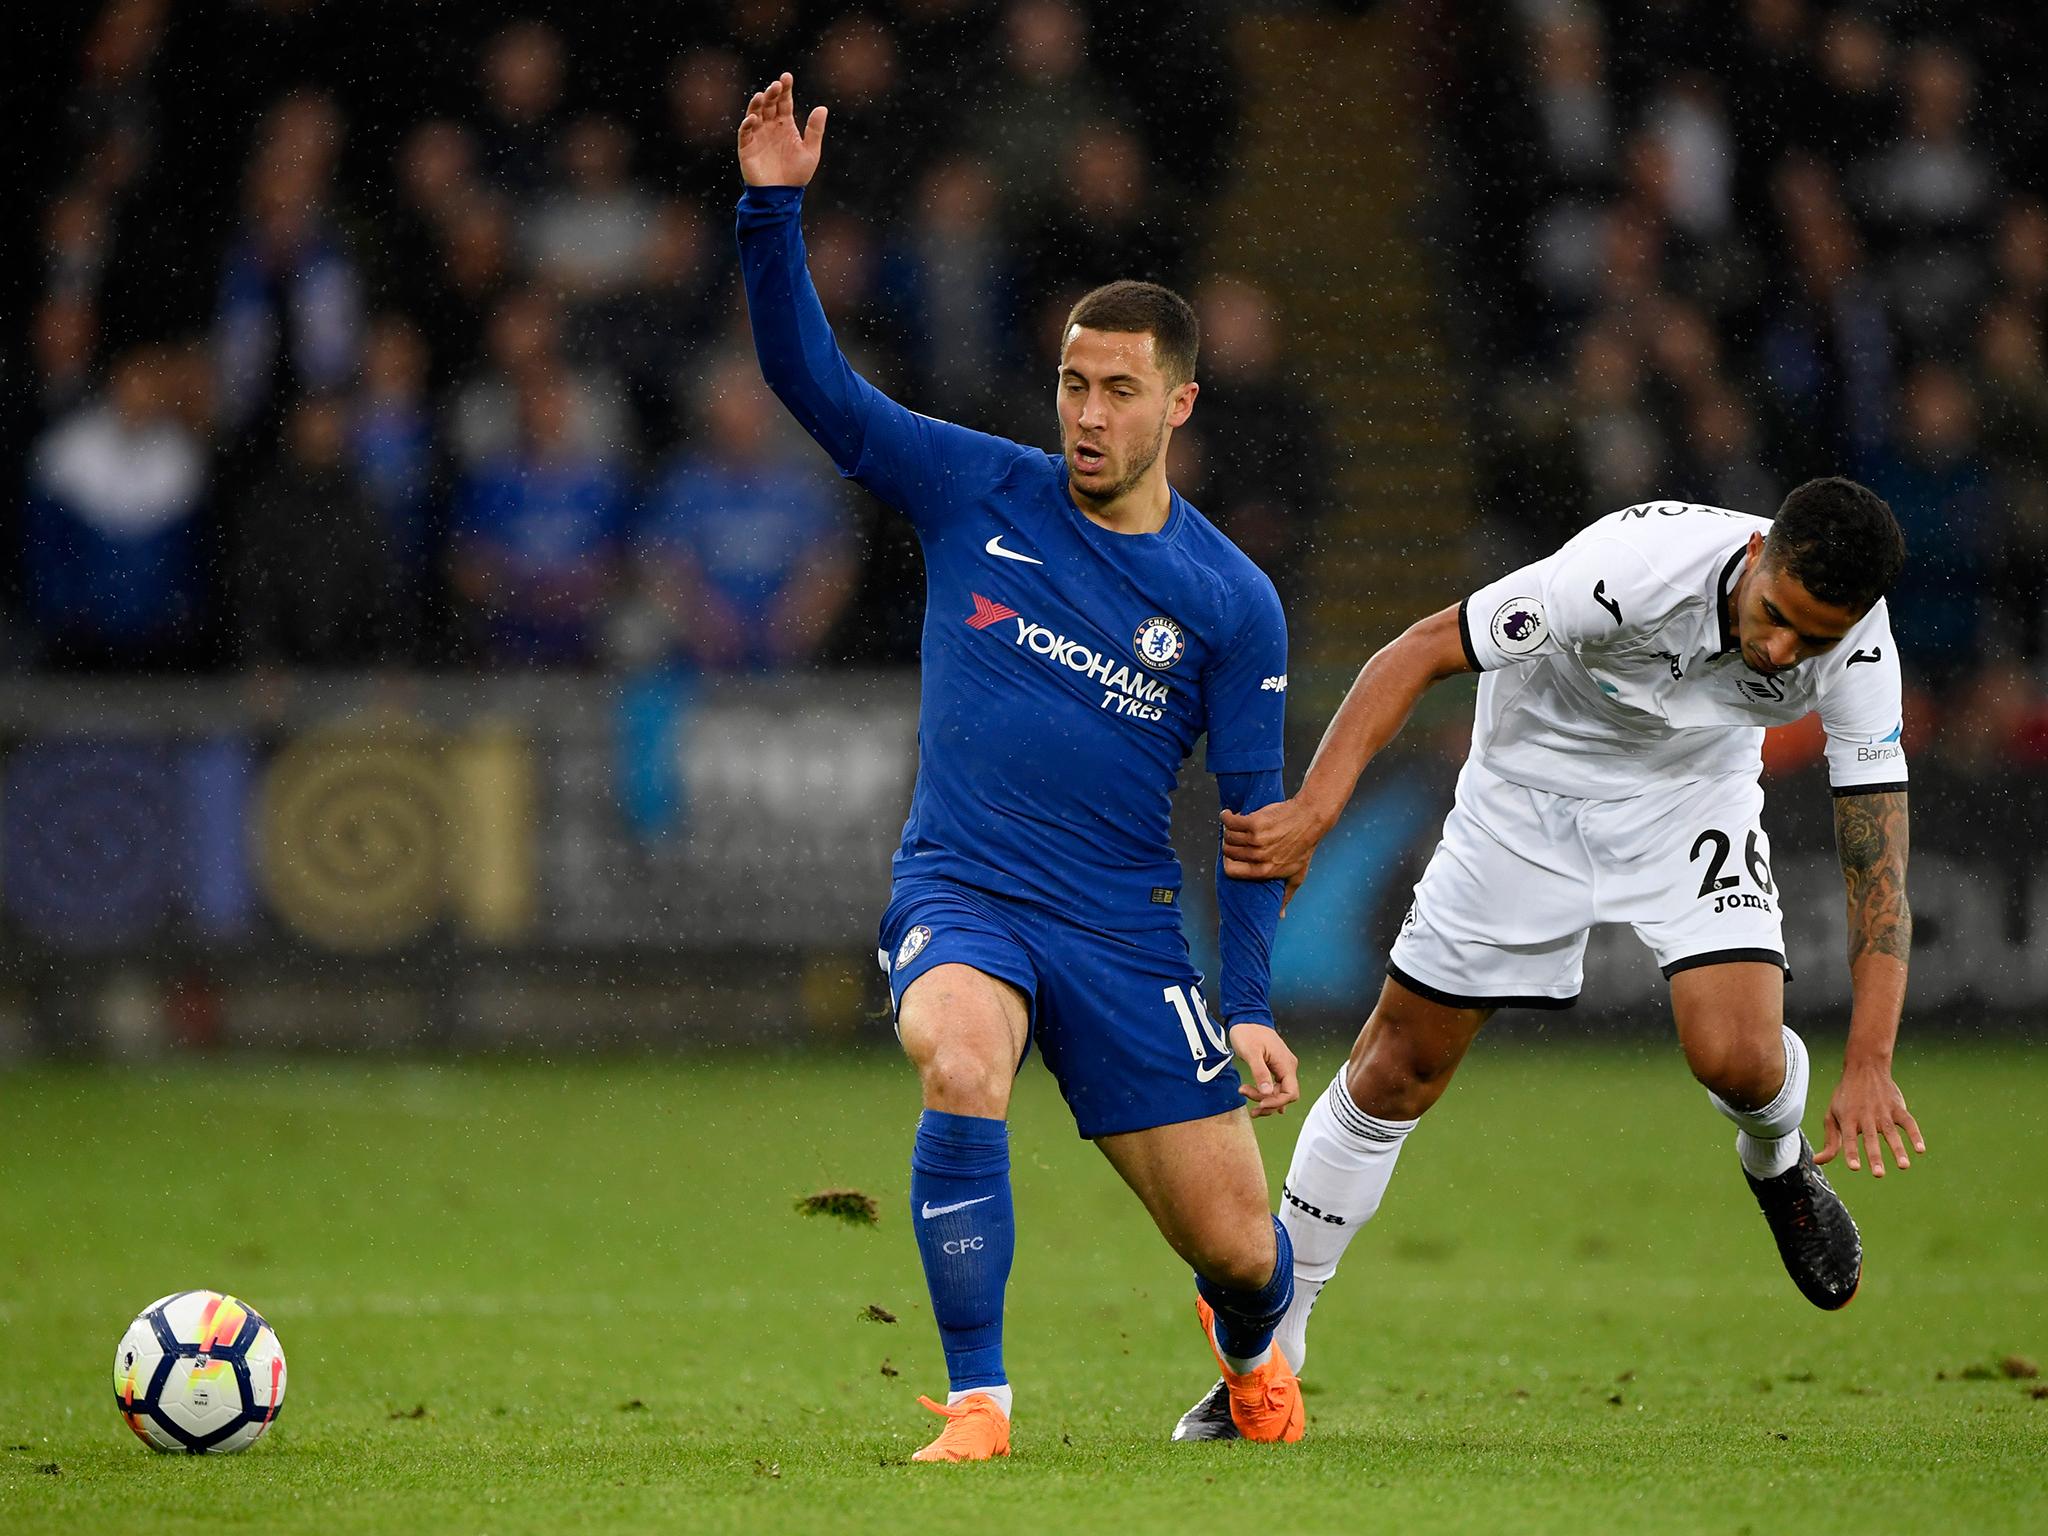 Chelsea vs Swansea player ratings: Eden Hazard stars but goals continue to allude Belgian forward